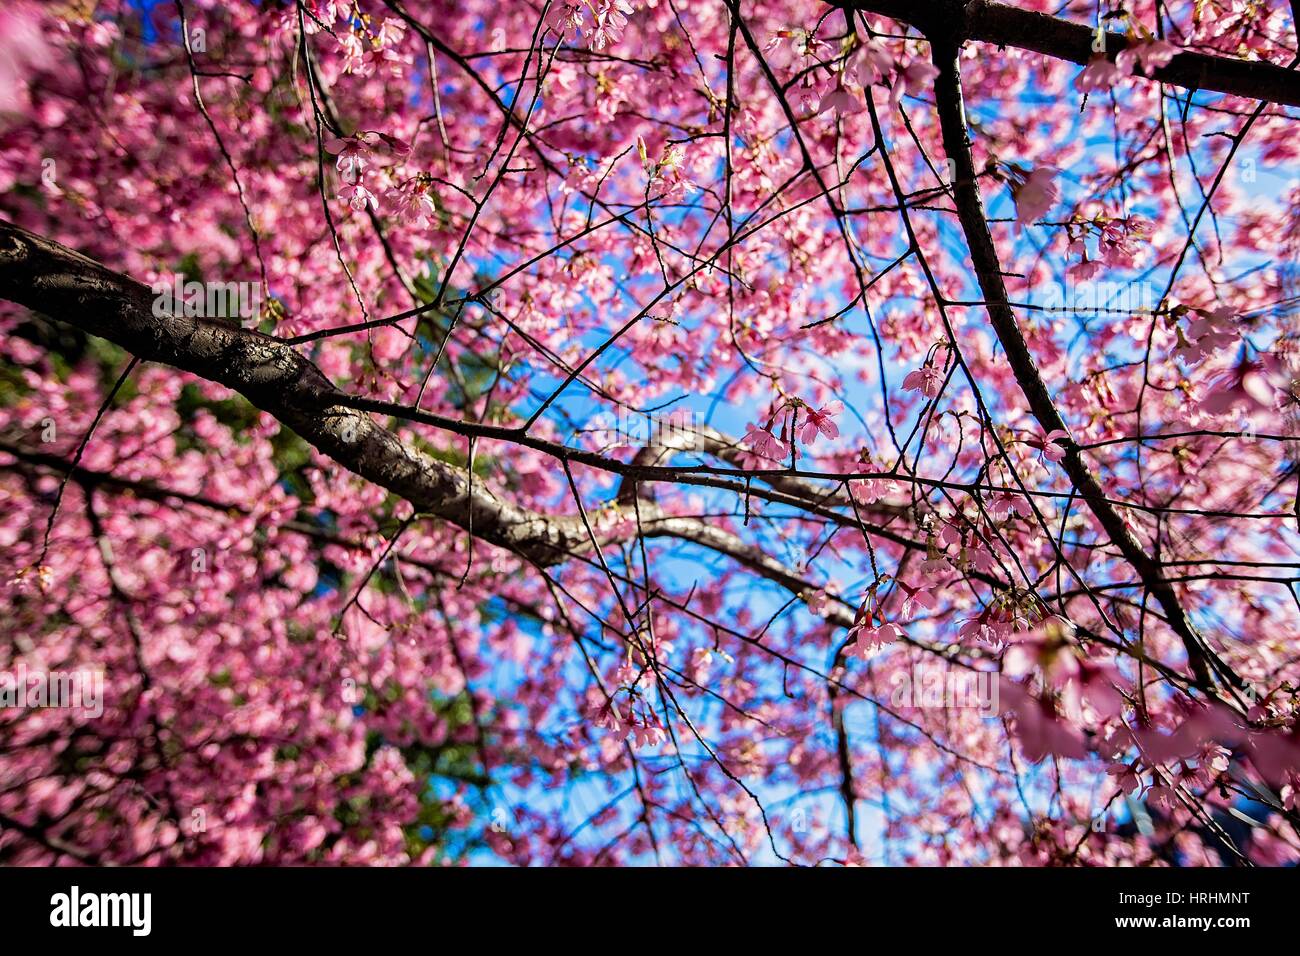 Cherry Blossoms in Van Ness, Washington, D.C. The famous spring blossoms which can be found all over the city have arrived earlier than expected this year. Stock Photo